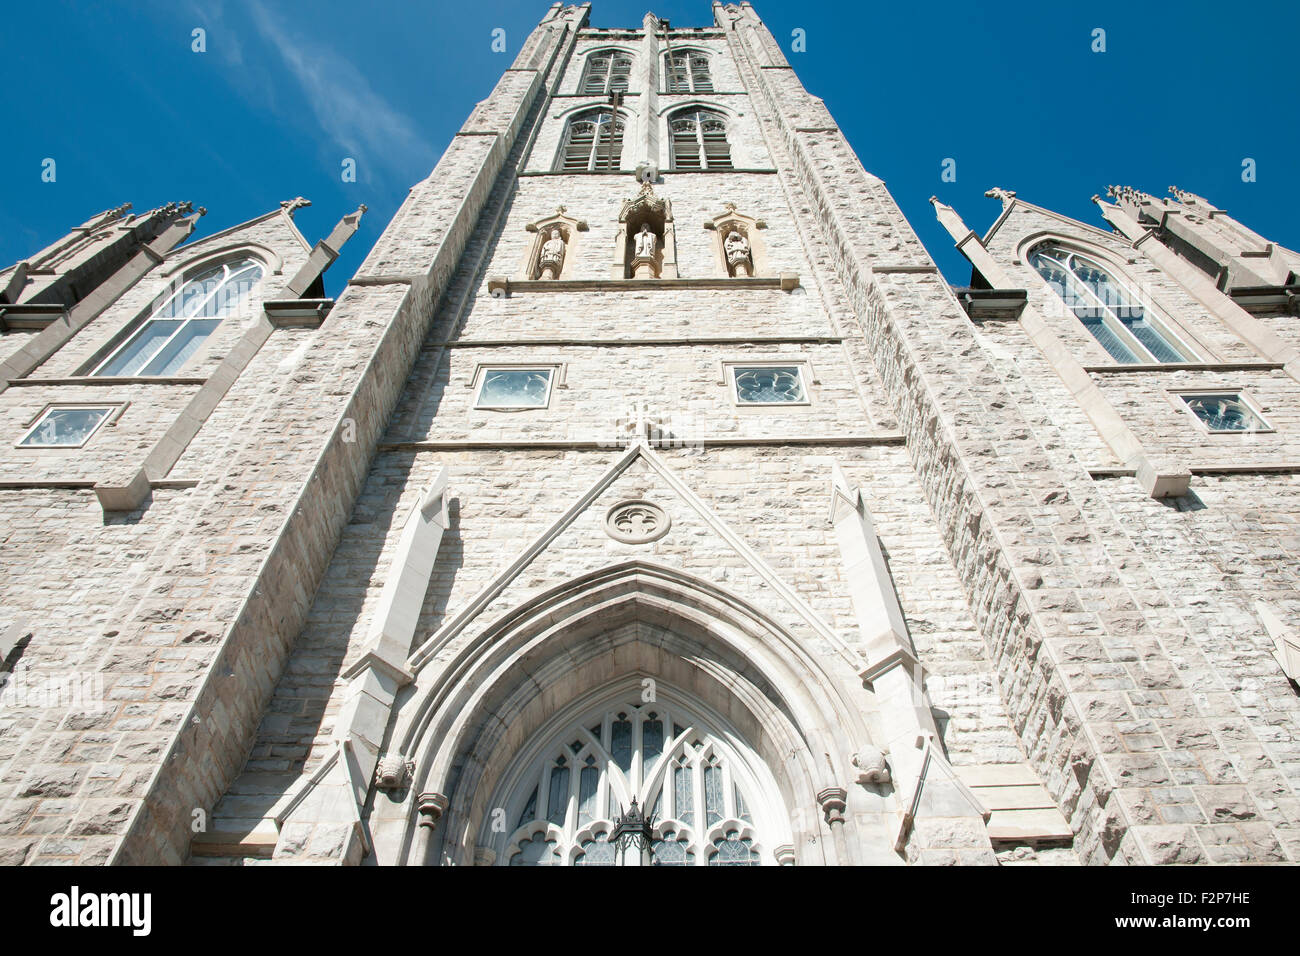 St Mary's Cathedral - Kingston - Canada Stock Photo